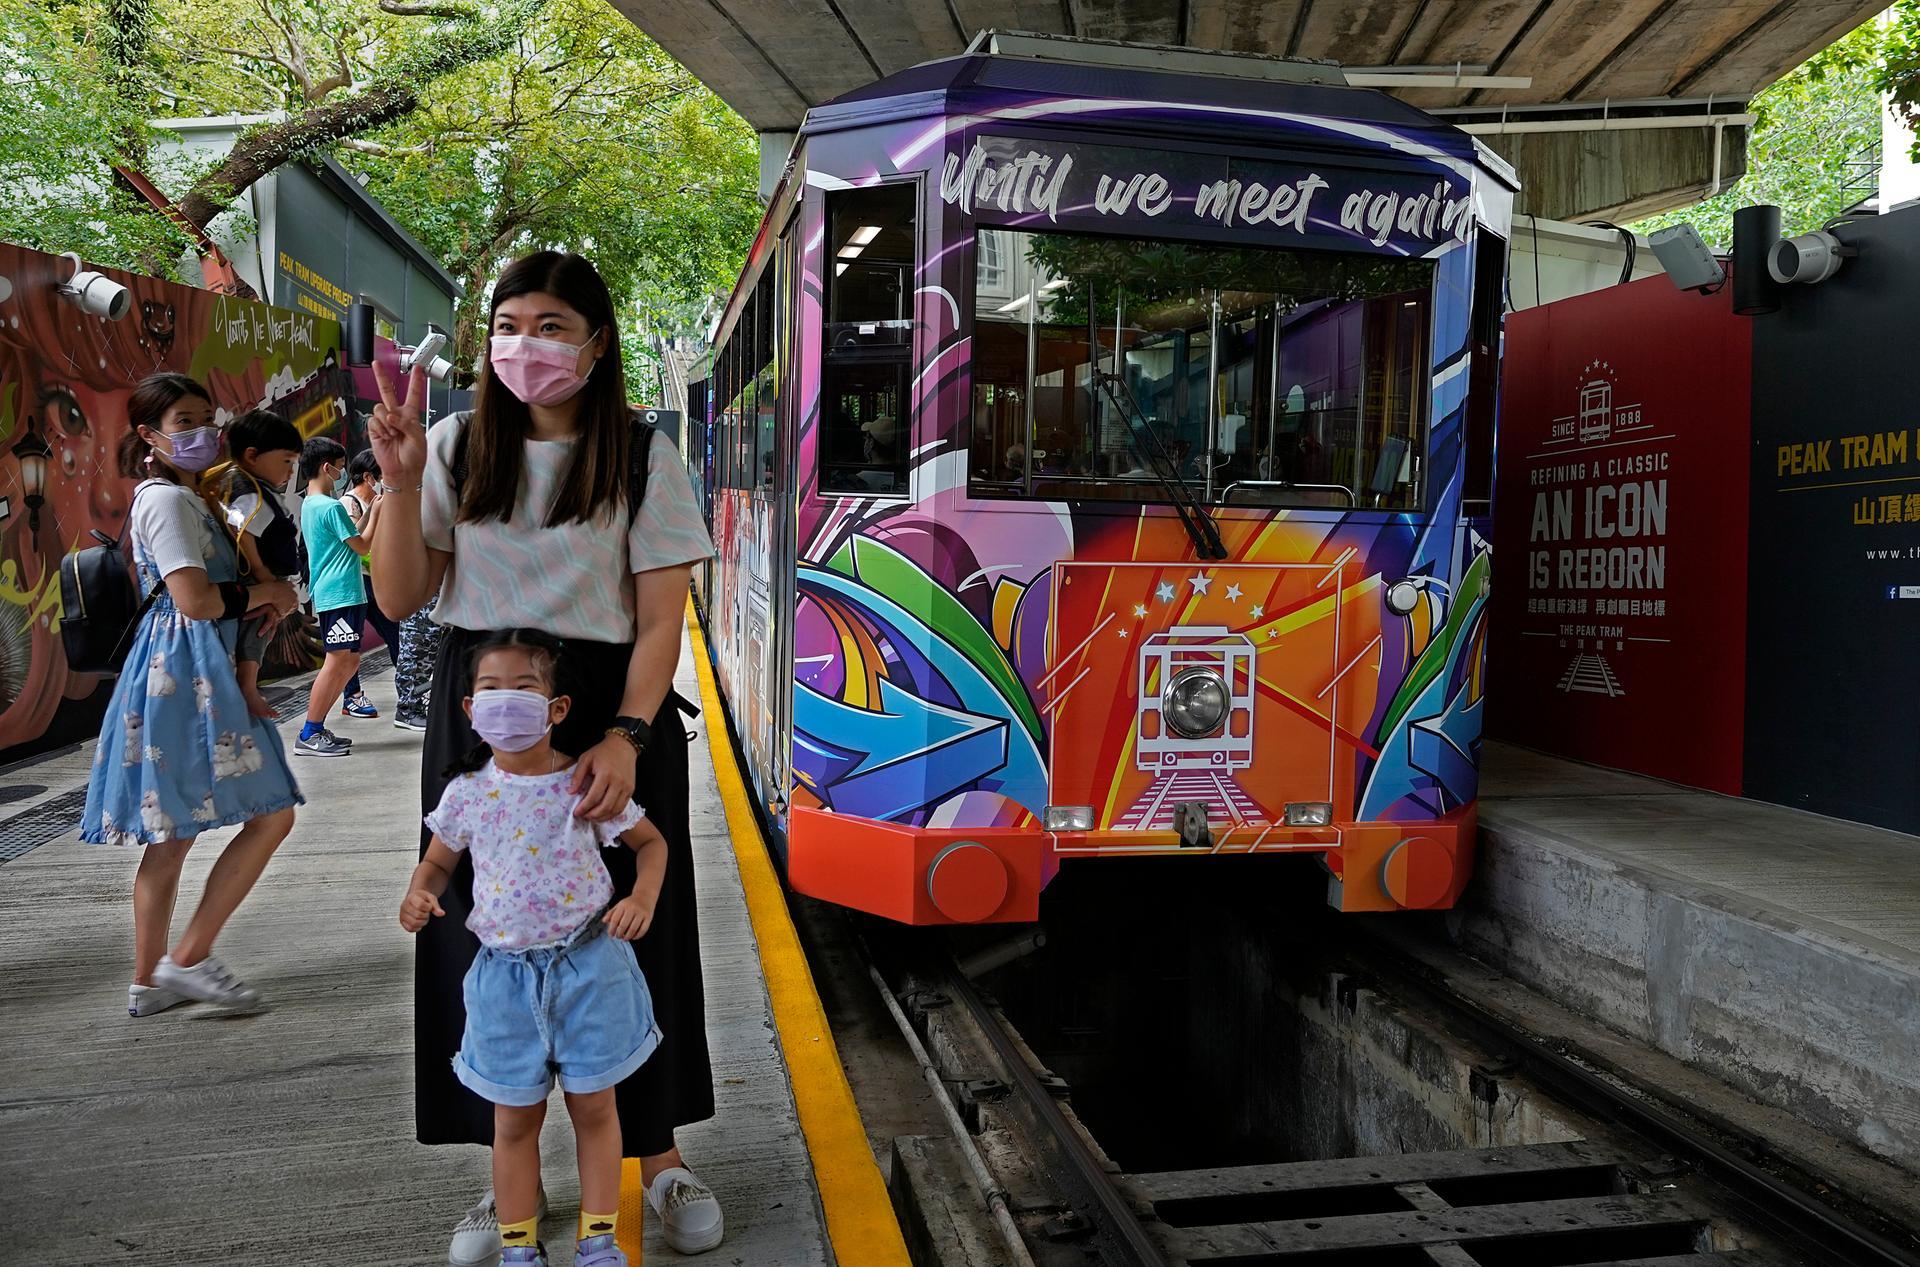 The Peak Tram, an old Hong Kong icon: taking millions of tourists a year to  Victoria Peak, what can we expect from its sixth and latest upgrade since  opening in 1888?